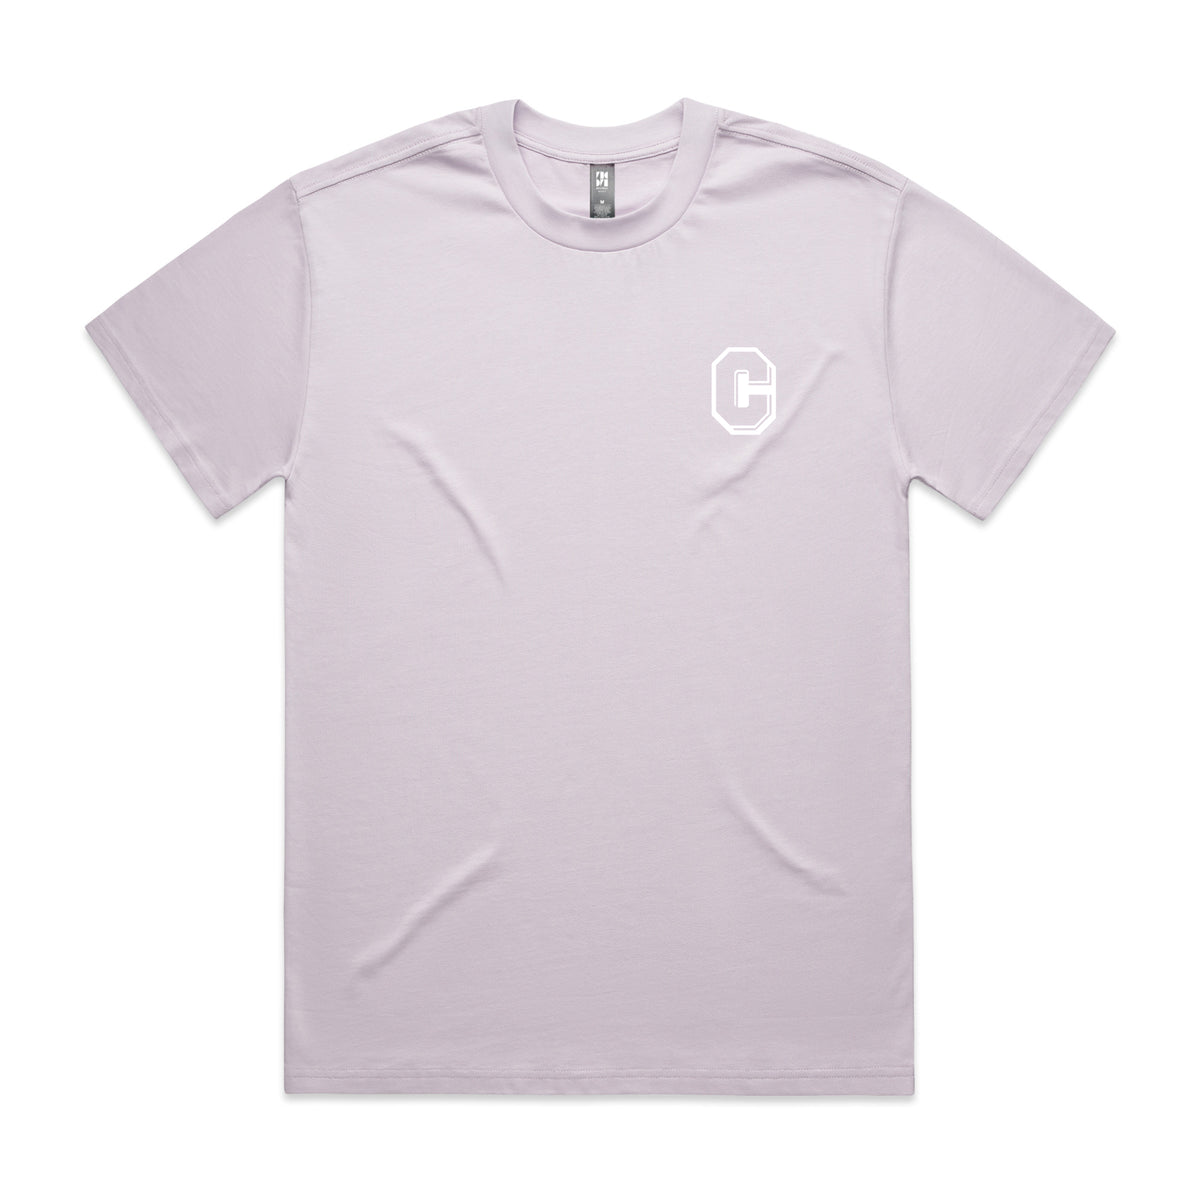 Orchid Complexity Tee